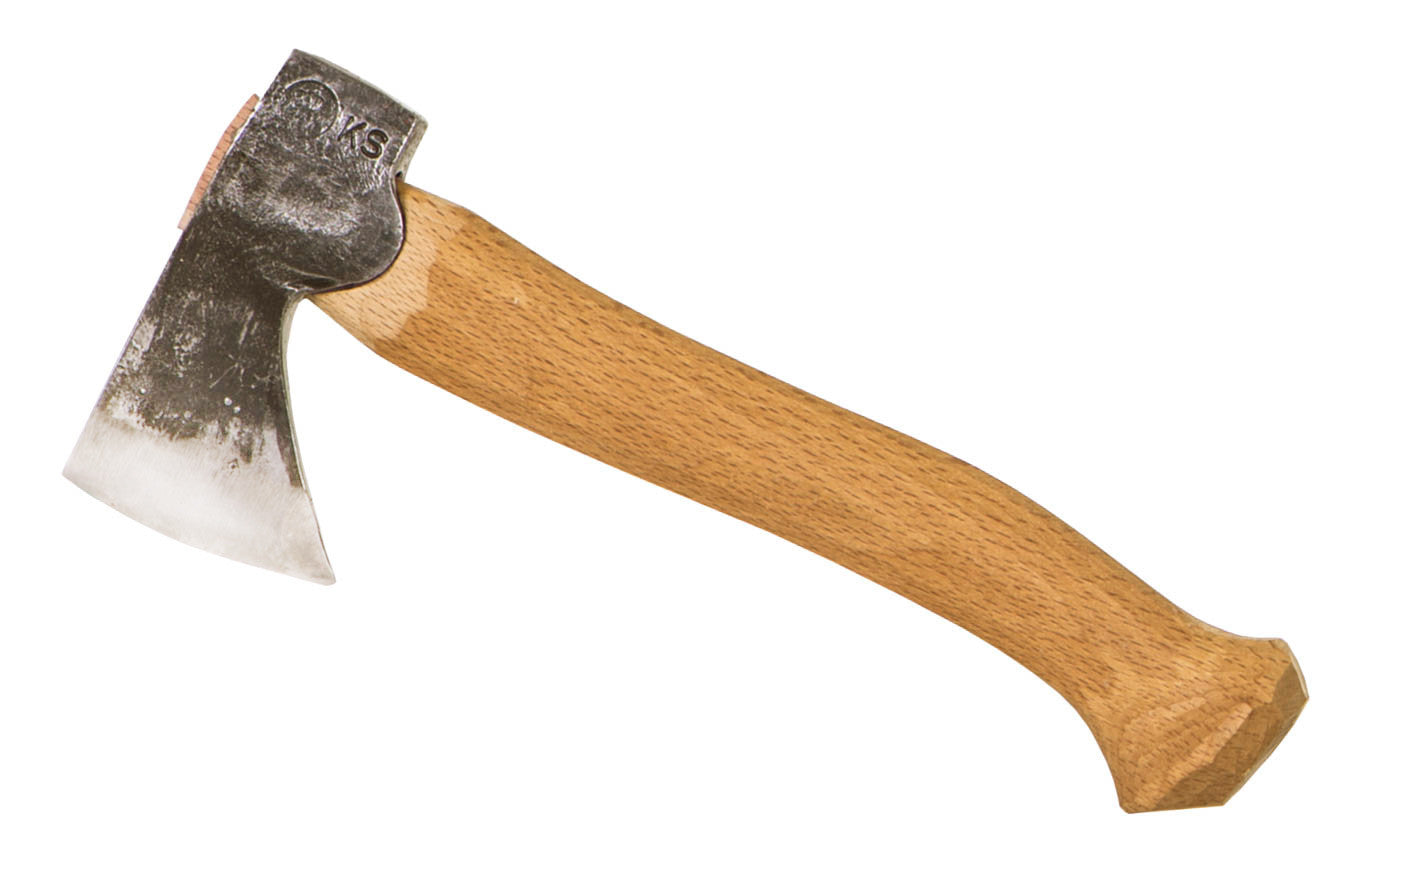 Gransfors Bruk Small Carving Hatchet ~ No. 473-R ~ Made in Sweden ~ Made of the highest quality Swedish steel ~ Hand-forged with excellent craftsmanship ~ Razor-sharp edge 